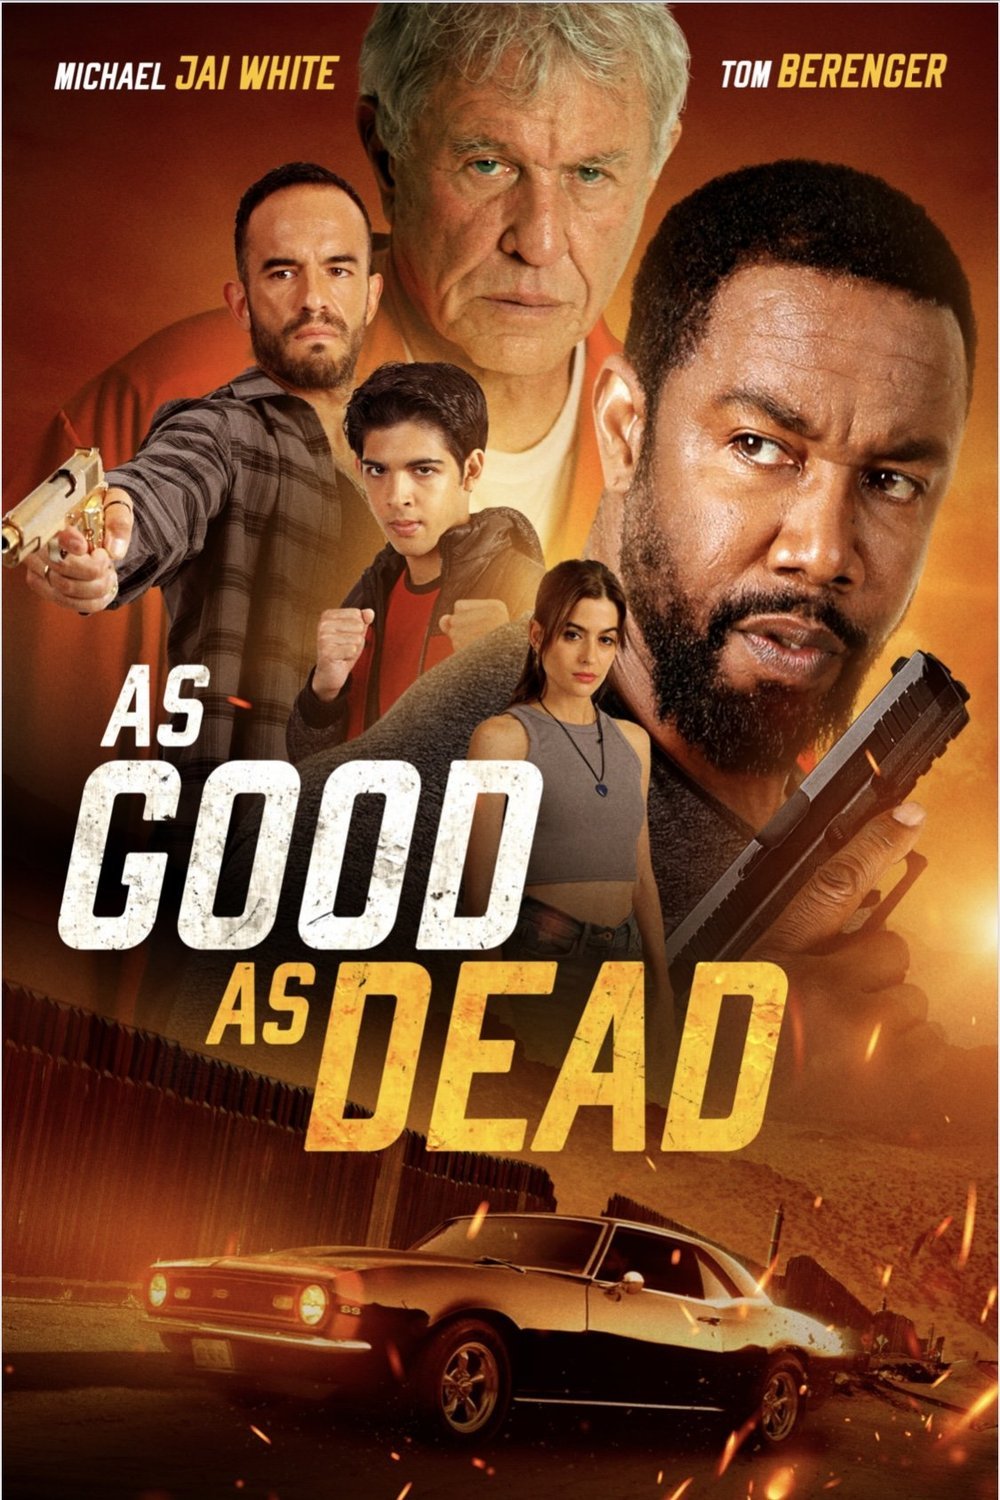 Poster of the movie As Good As Dead